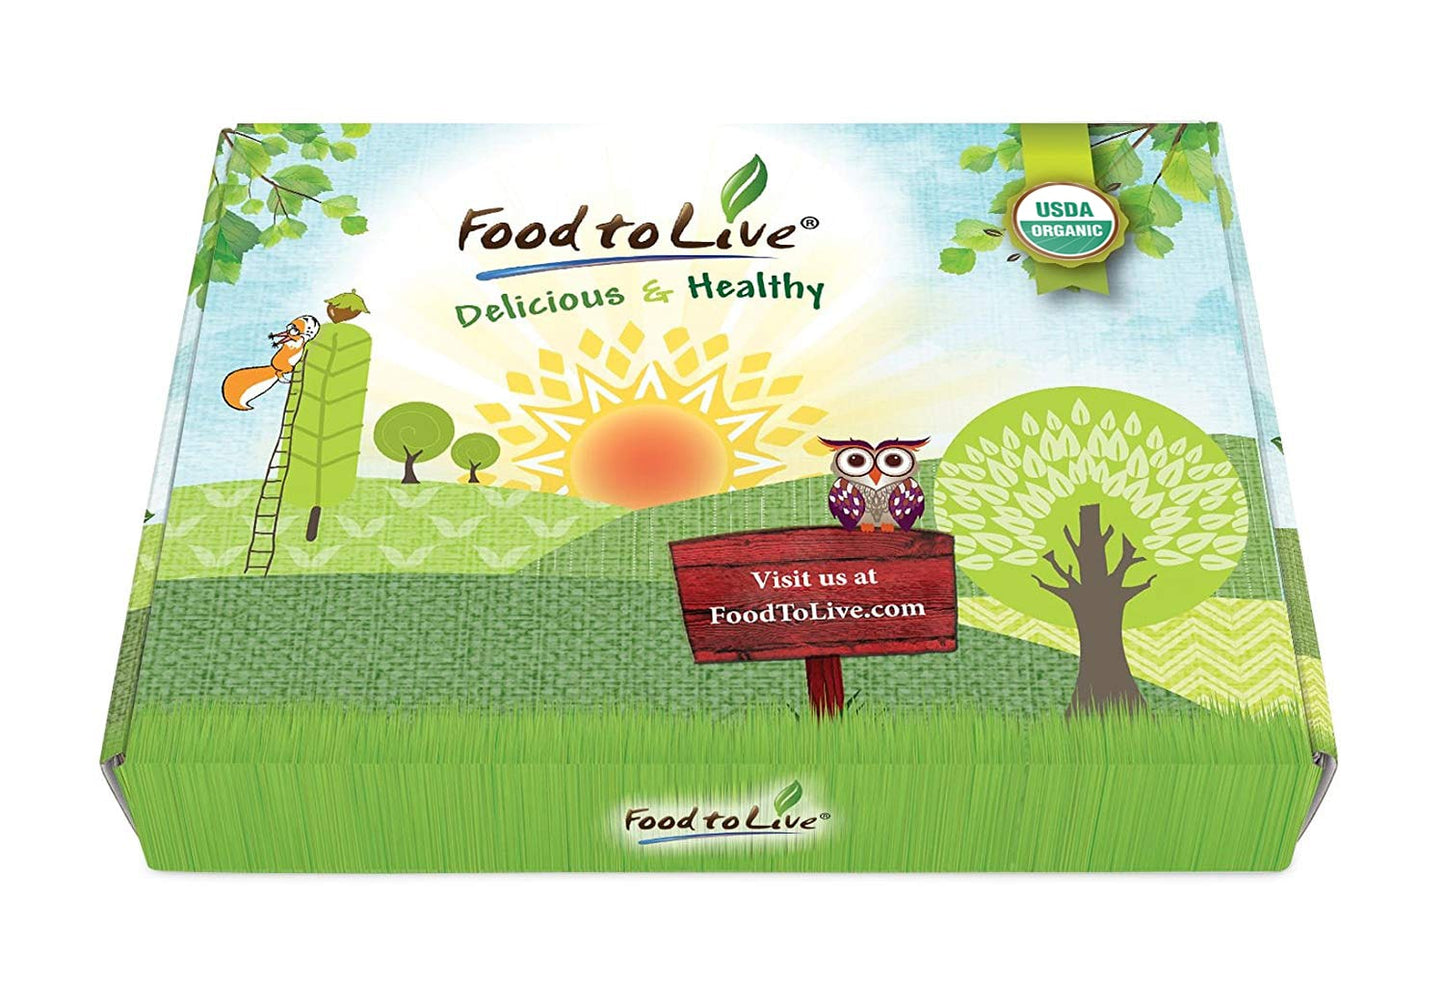 Organic Dried Berries in a Gift Box — A Variety Pack of Blueberries, Strawberries, Cranberries, Goldenberries, and Raisins - by Food to Live